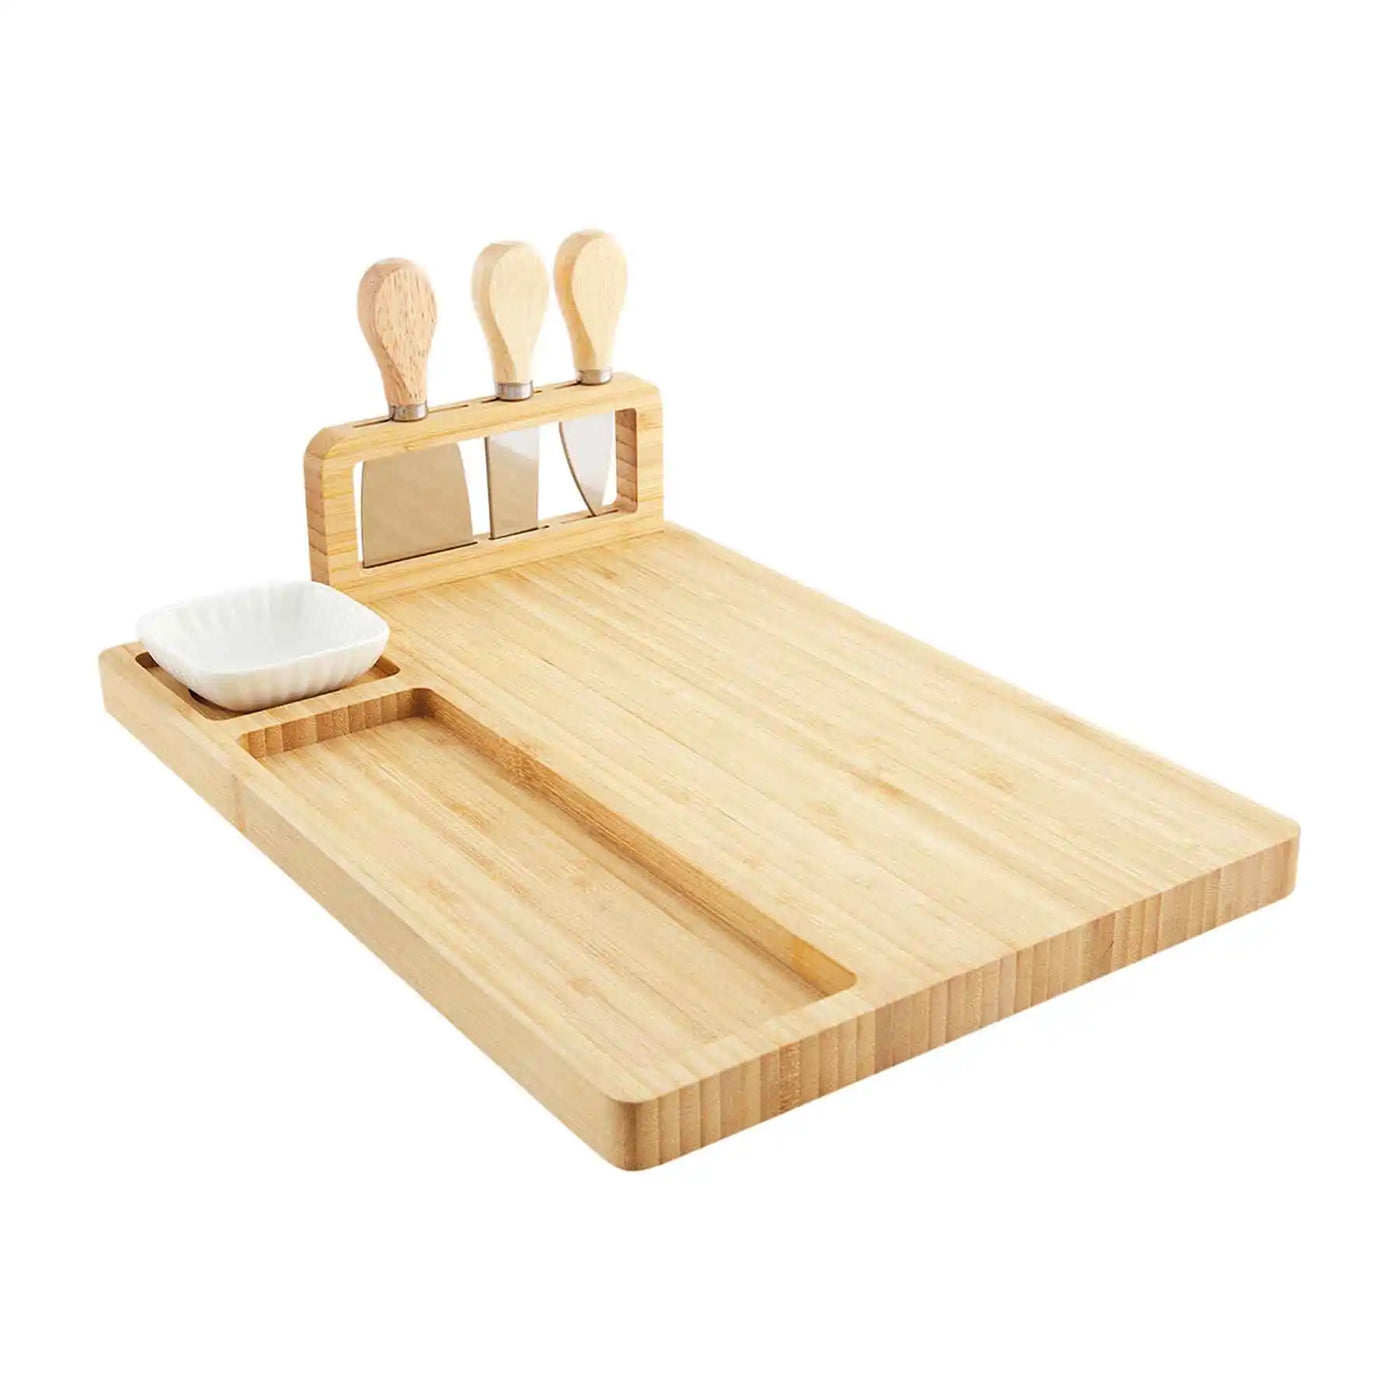 Board And Utensil Set